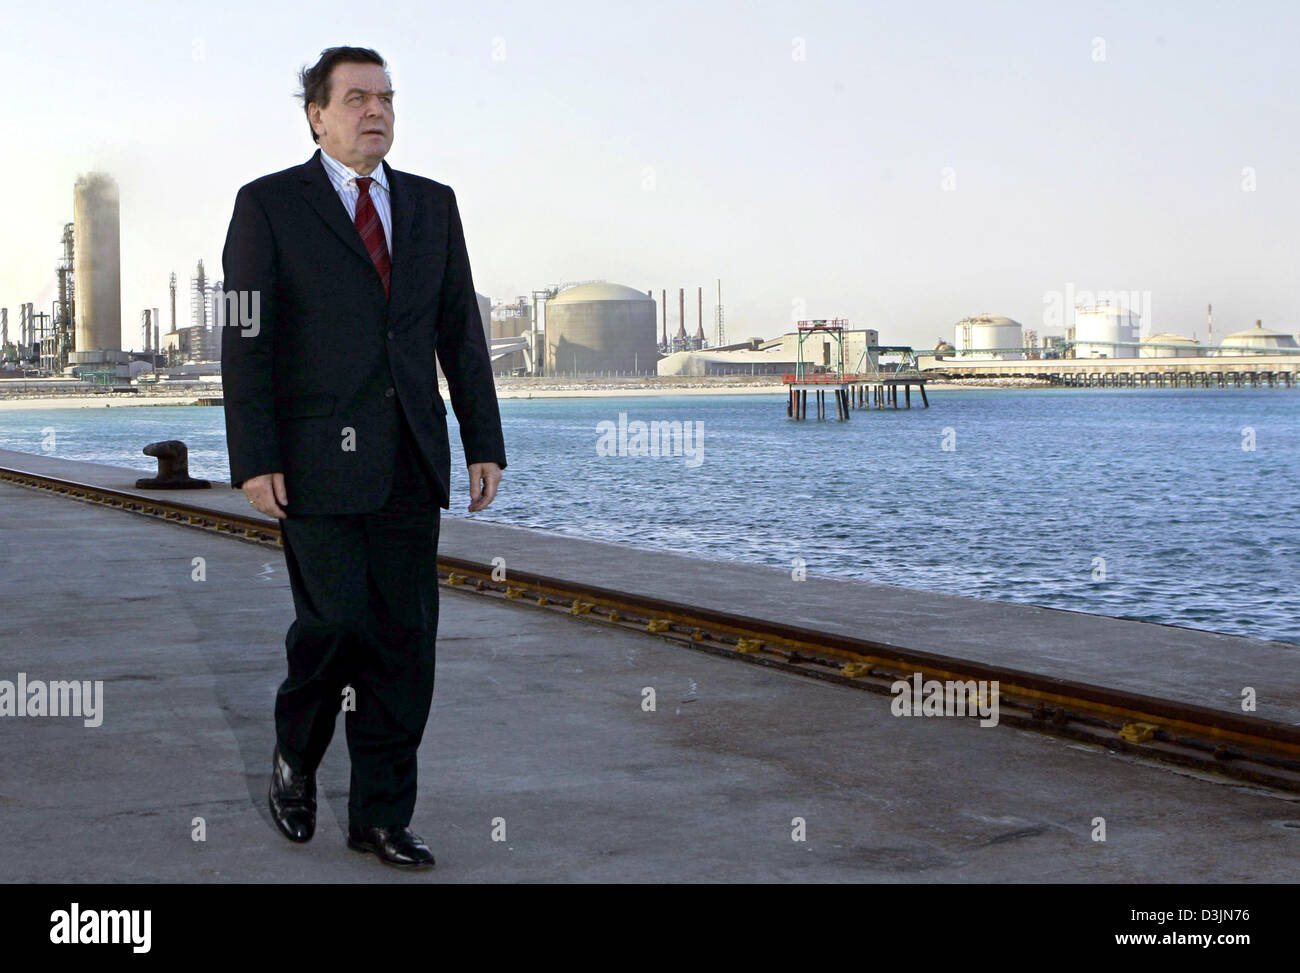 (dpa) - German Chancellor Gerhard Schroeder walks along a pier during his visit at a production plant for fertilizers which was built by the German company Uhde in Mesaieed, Qatar, Tuesday, 01 March 2005. Schroeder is on a week-long tour of seven Arab countries aimed at boosting Germany's trade and political relations in the Gulf region. Stock Photo